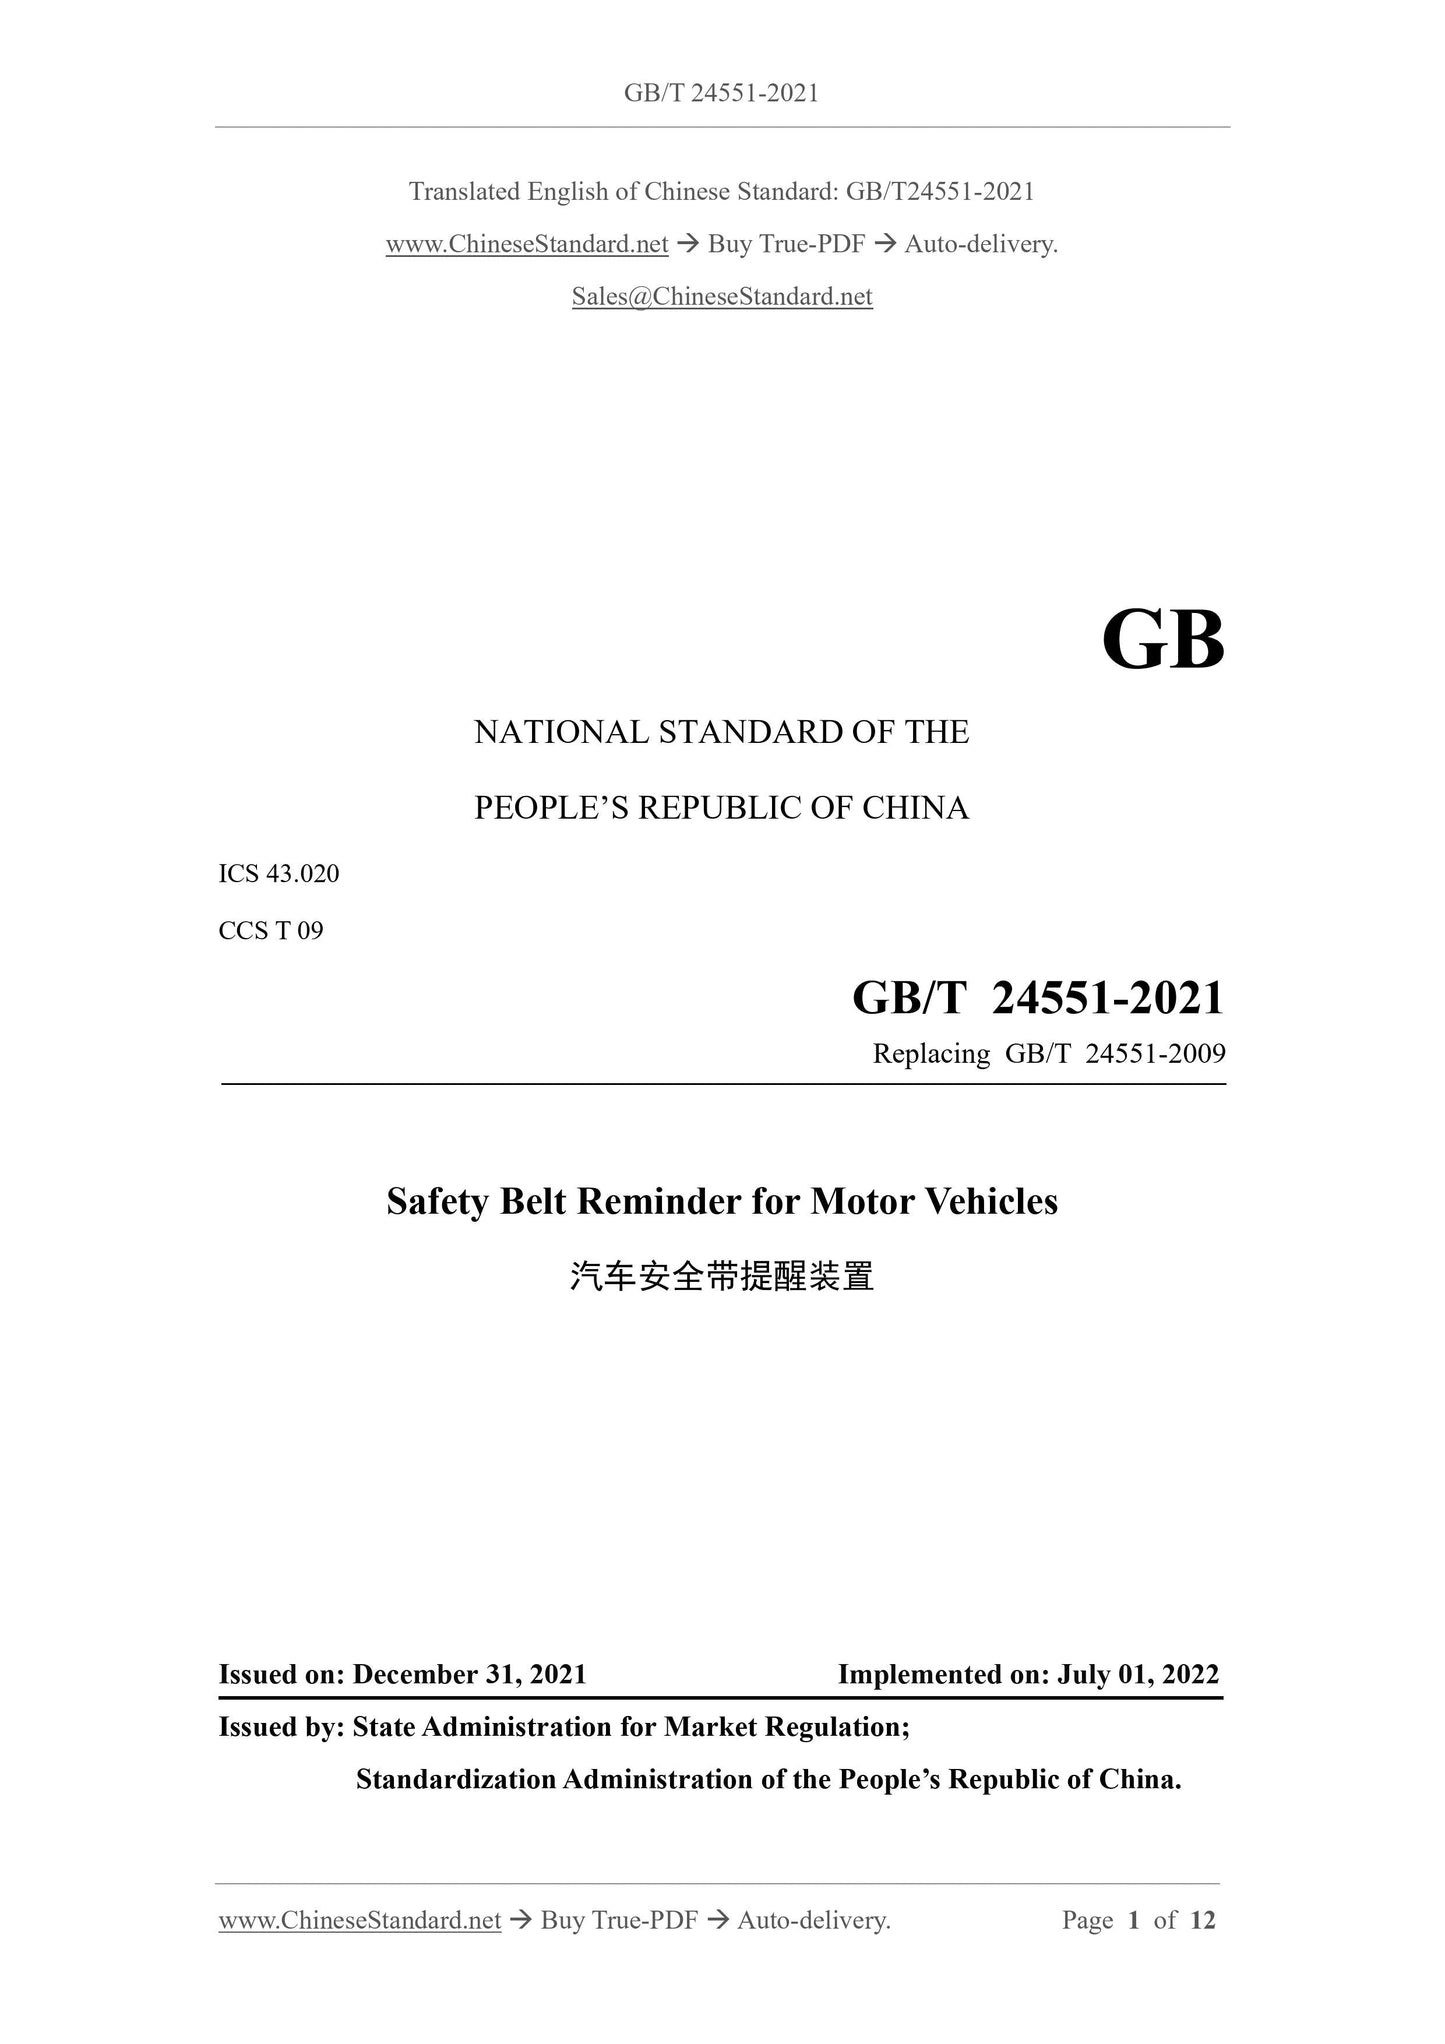 GB/T 24551-2021 Page 1